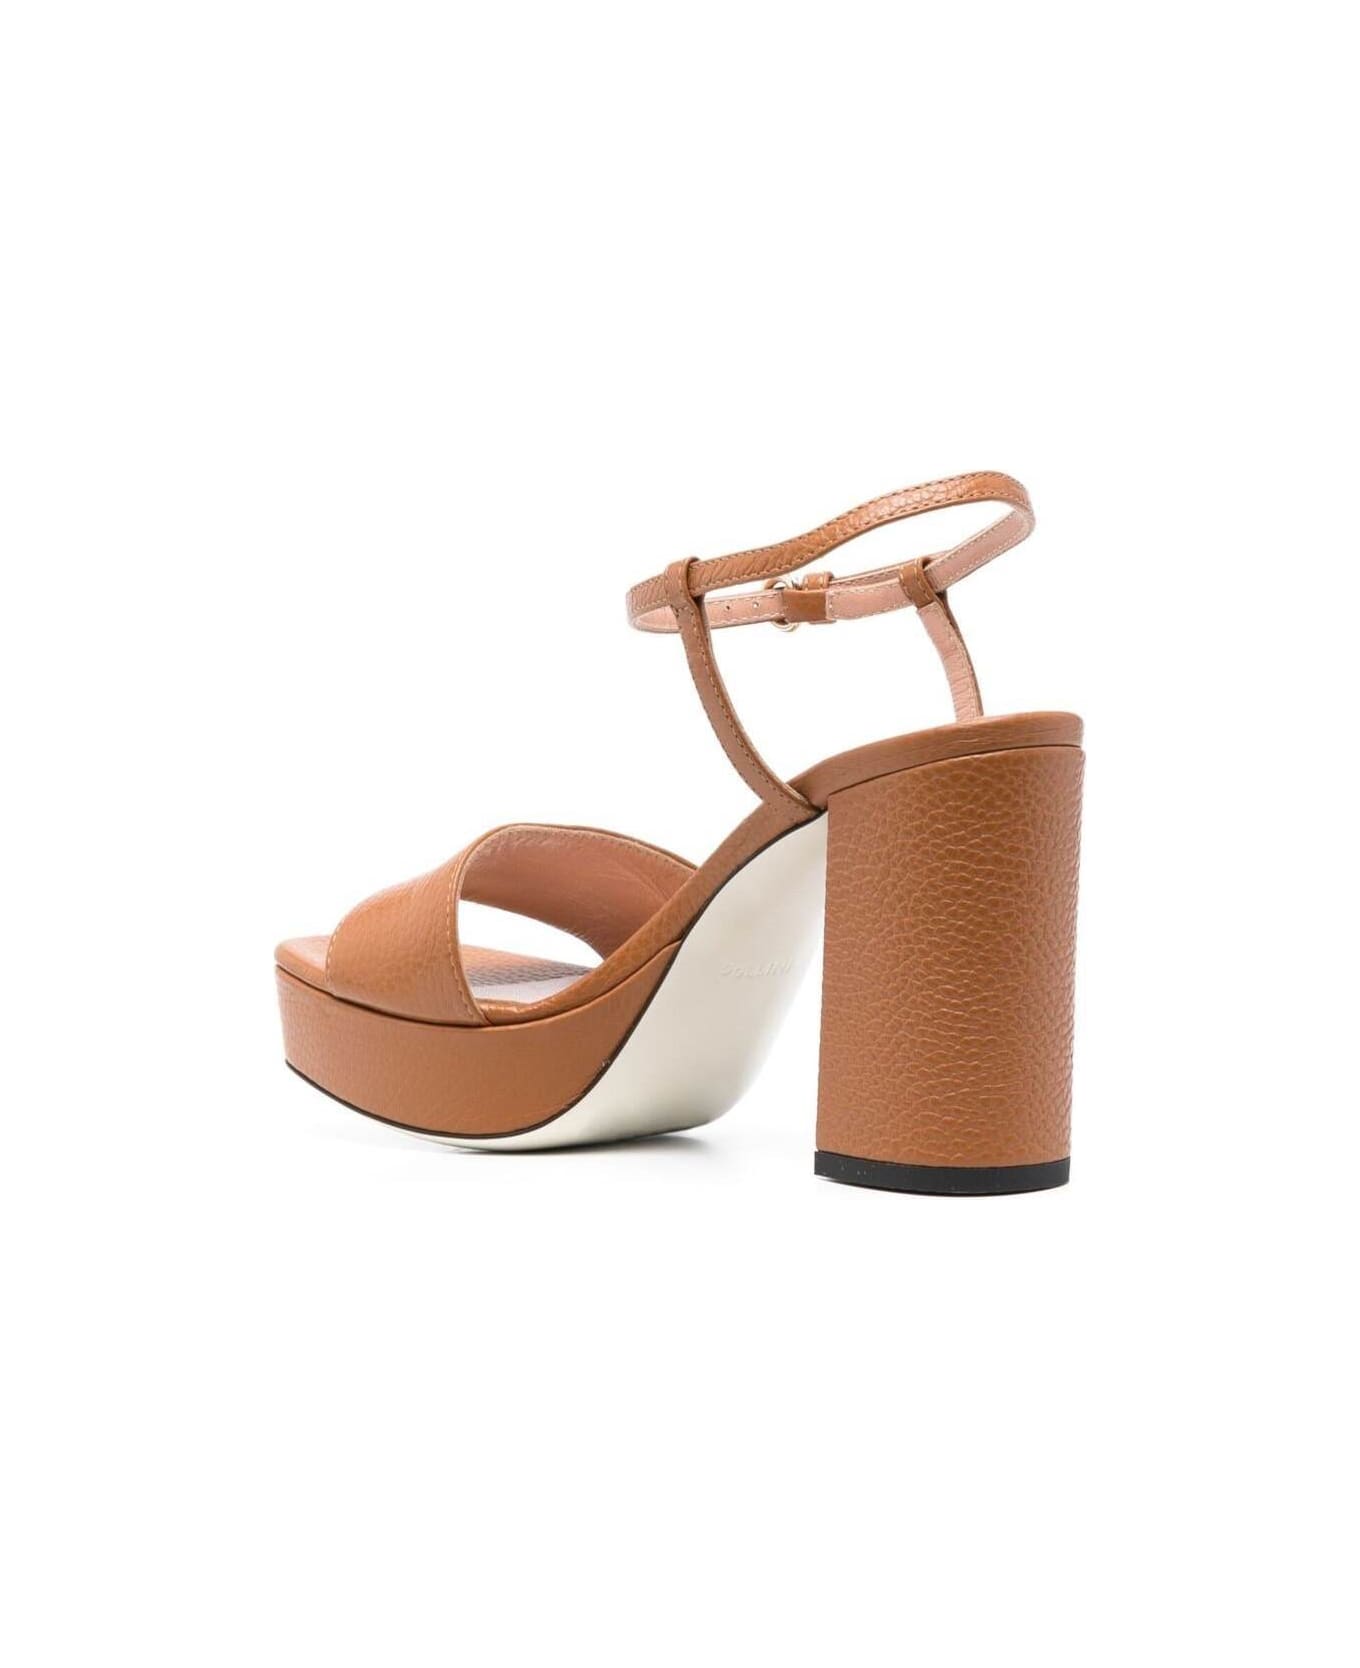 Pollini Plateau Sandals With Block Heel In Brown Leather Woman - Brown